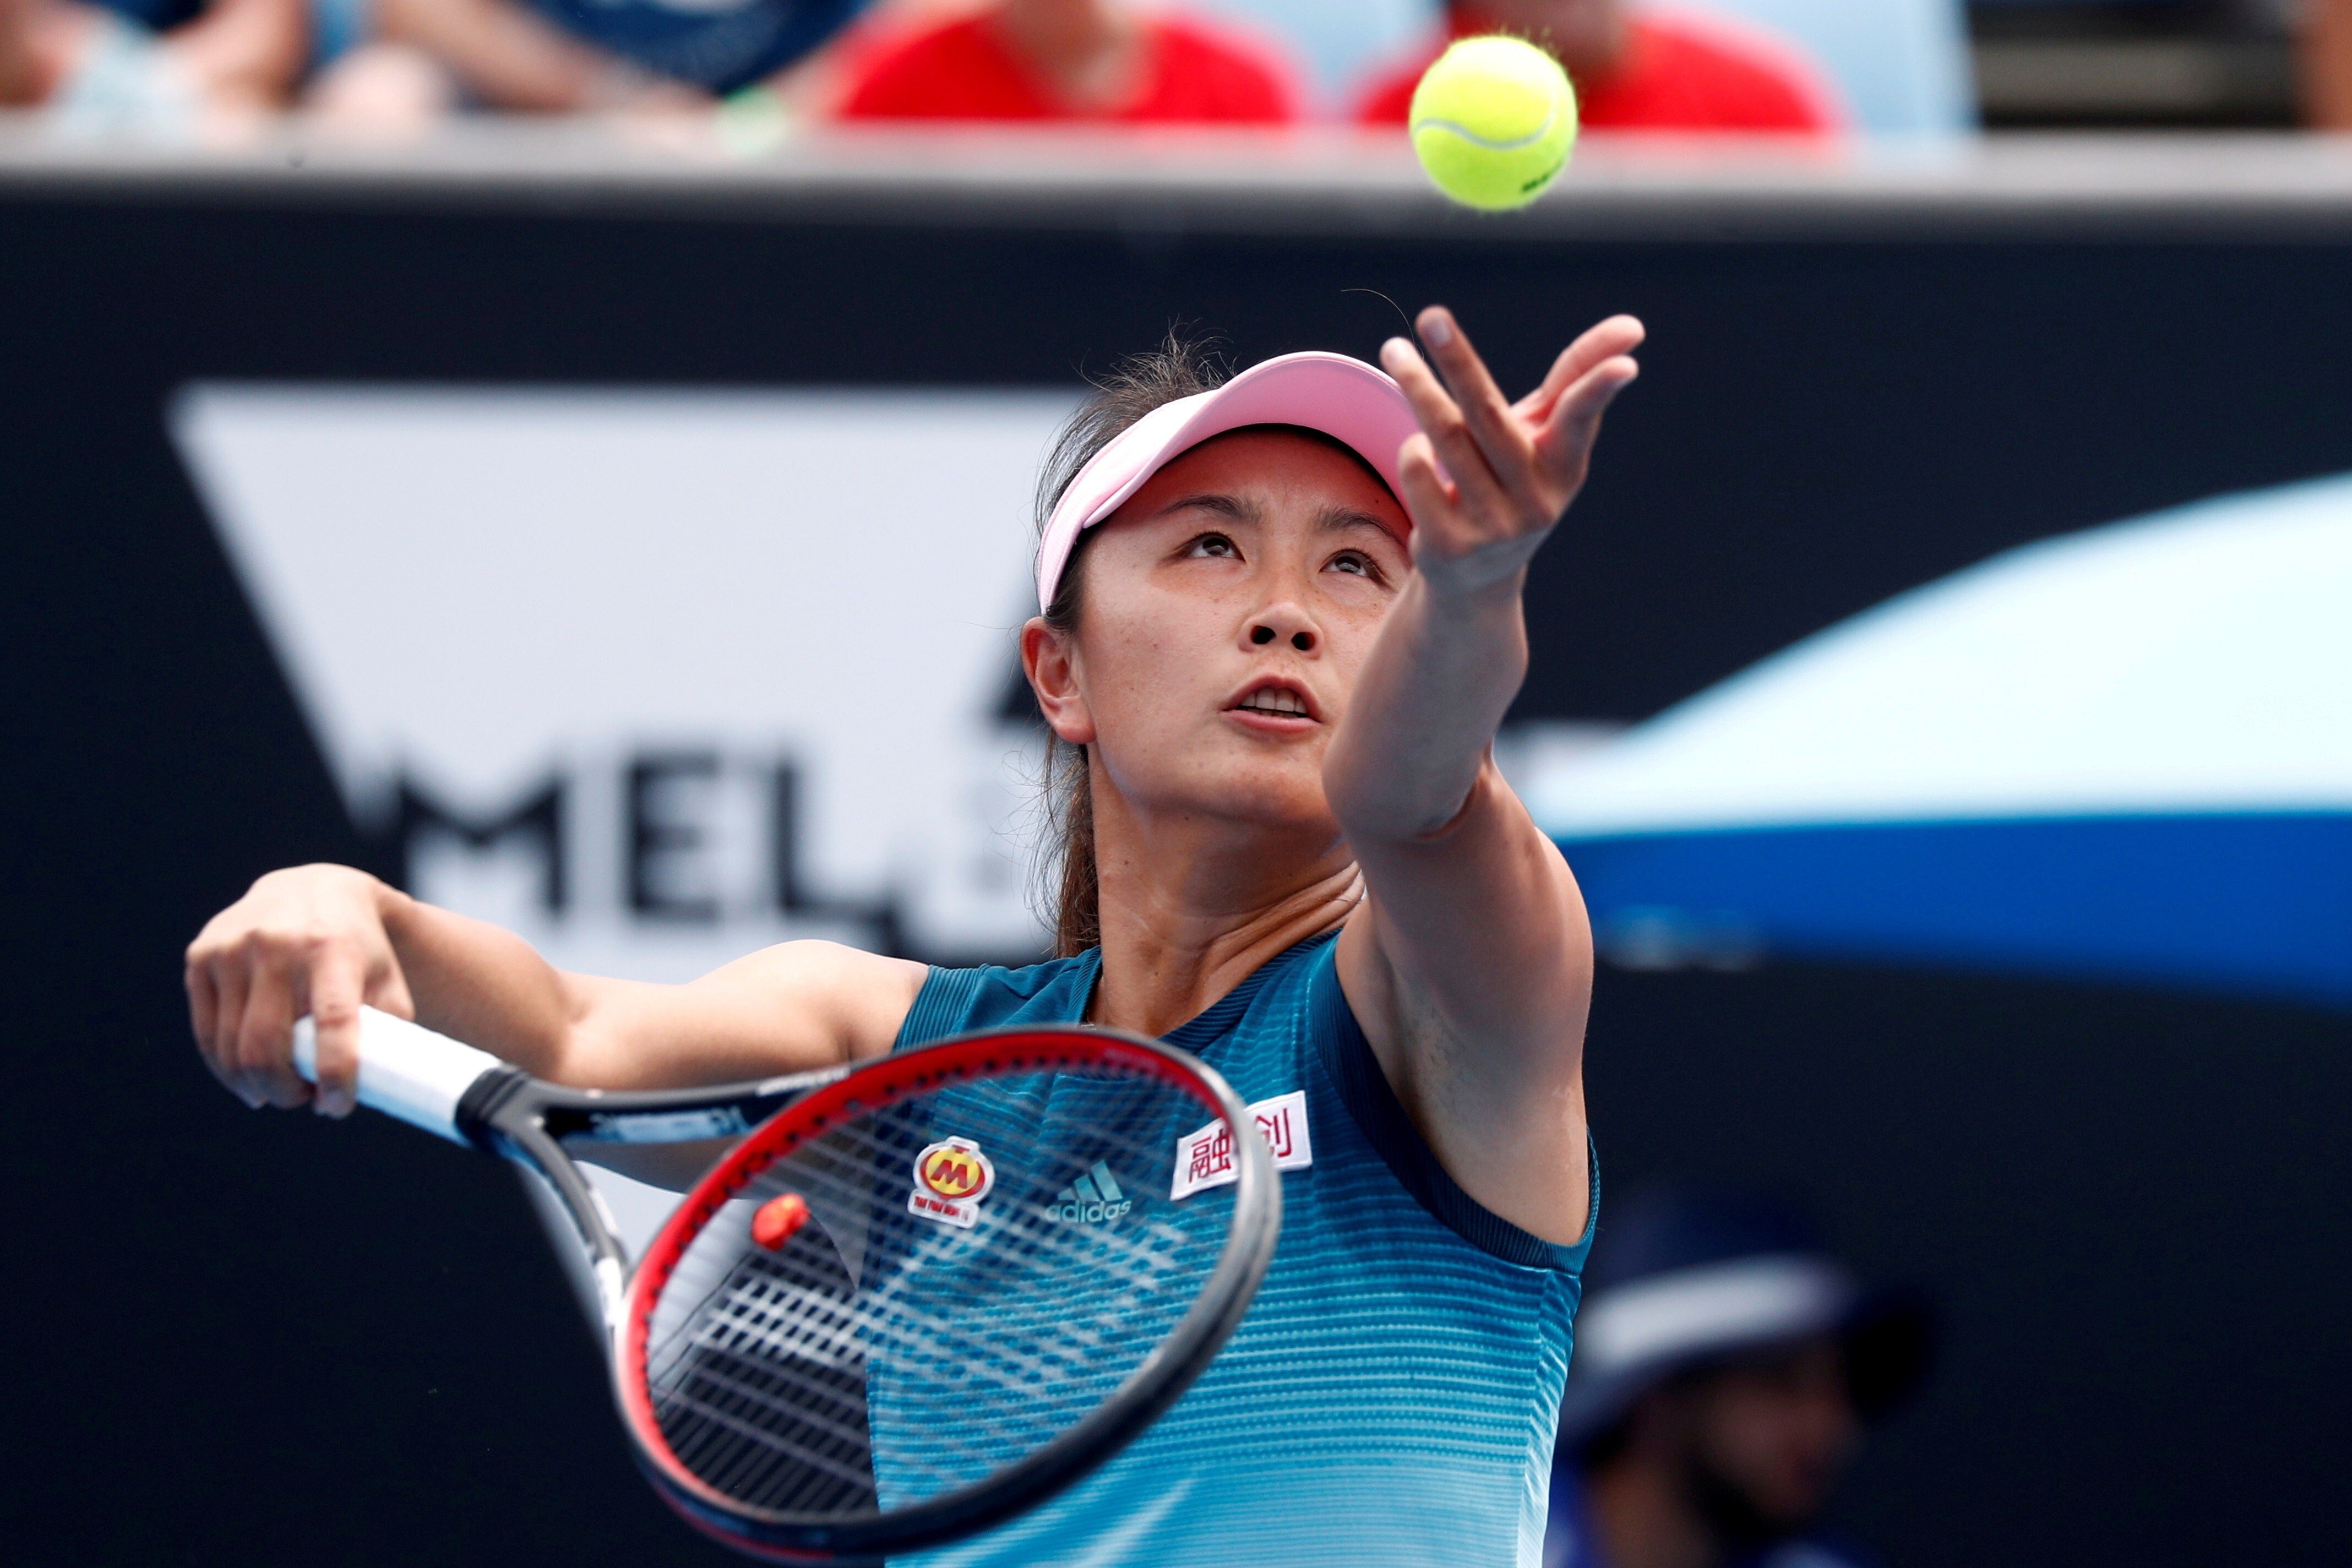 Peng Shuai’s accusations were removed from Chinese social media around 30 minutes after they were posted. Photo: Reuters